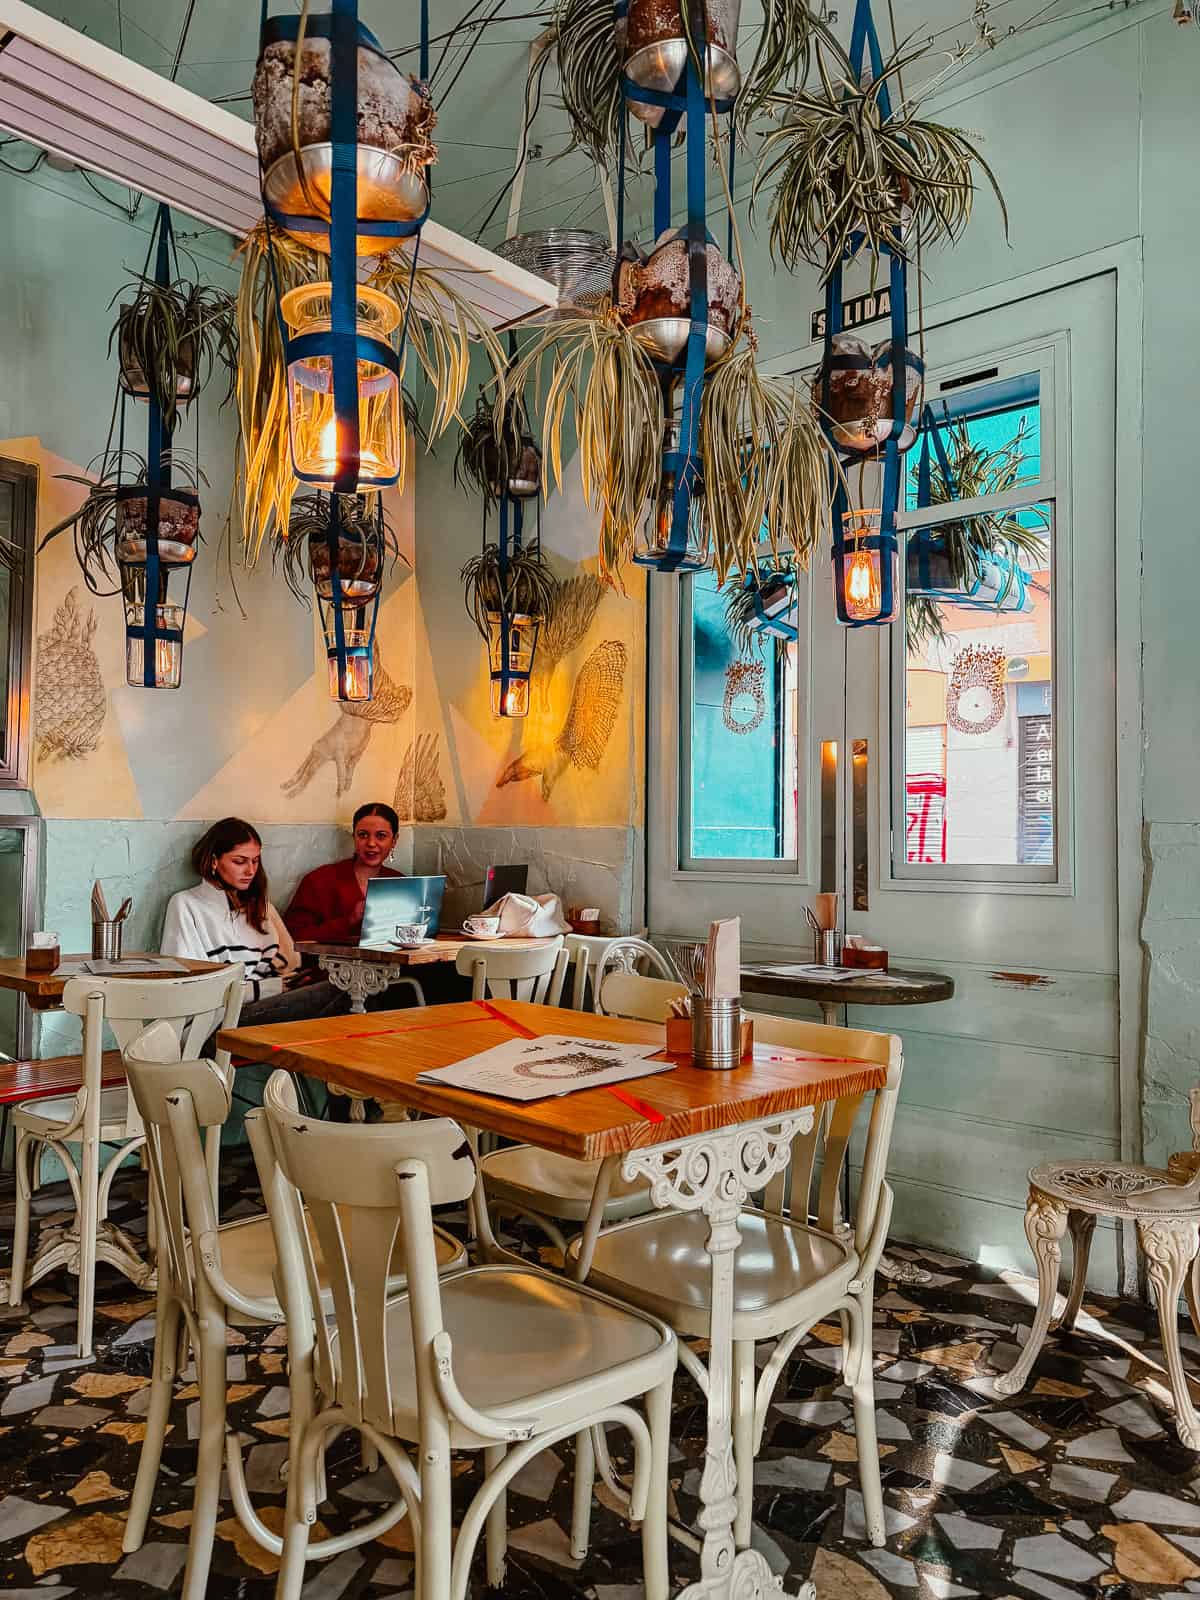 A cozy, eclectic café interior with hanging potted plants and unique lanterns, where patrons engage in conversation by a window with a view to the street, surrounded by vintage-style furniture and artistic wall illustrations